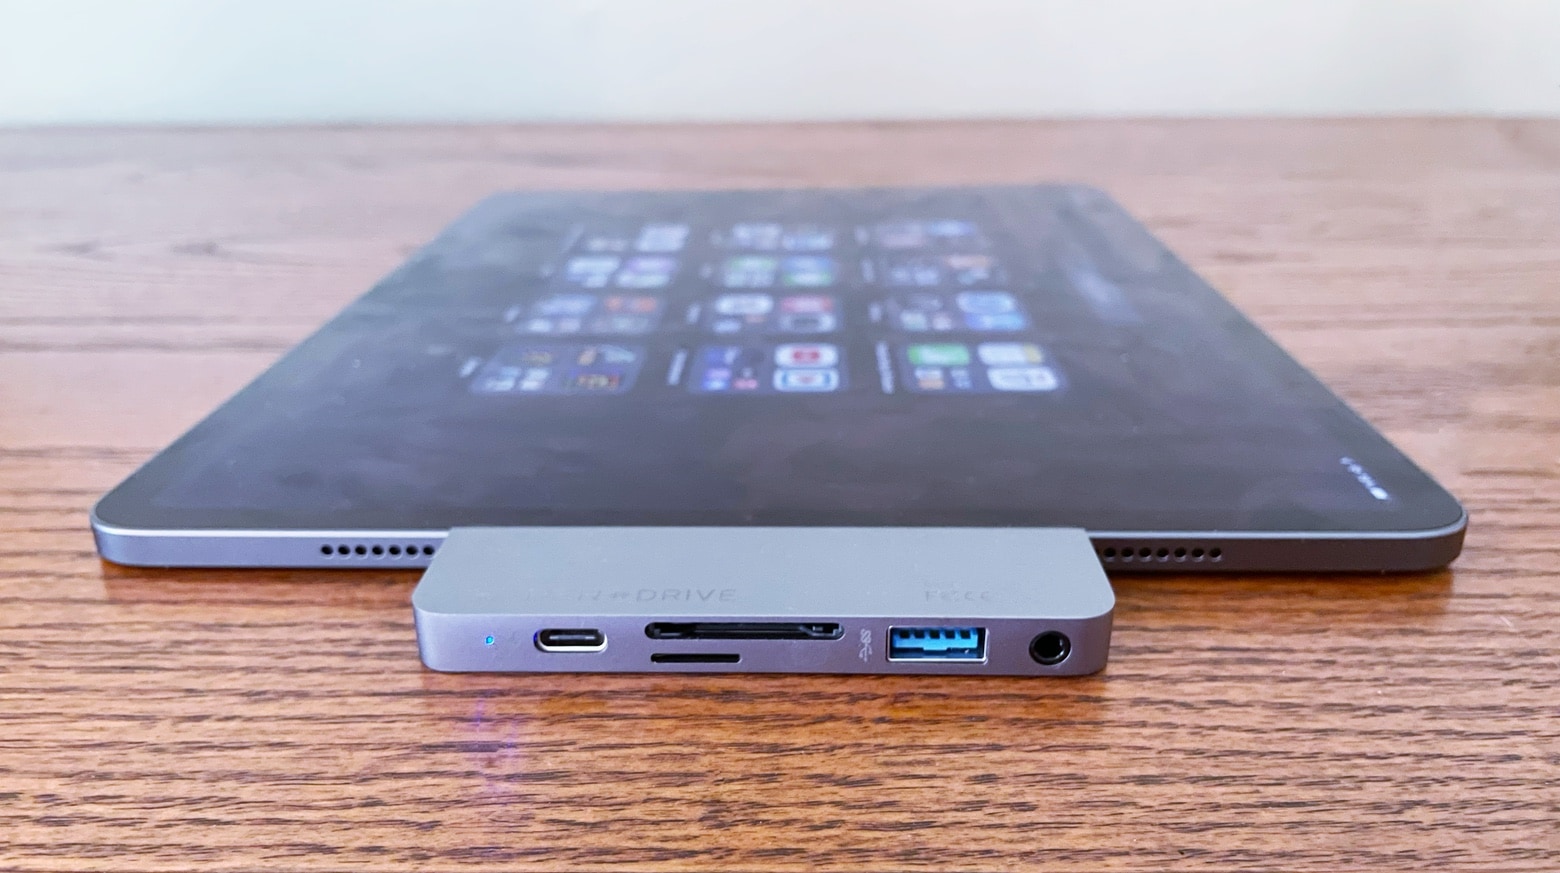 Sanho HyperDrive USB-C 6-in-1 Hub for iPad review: Tiny but powerful